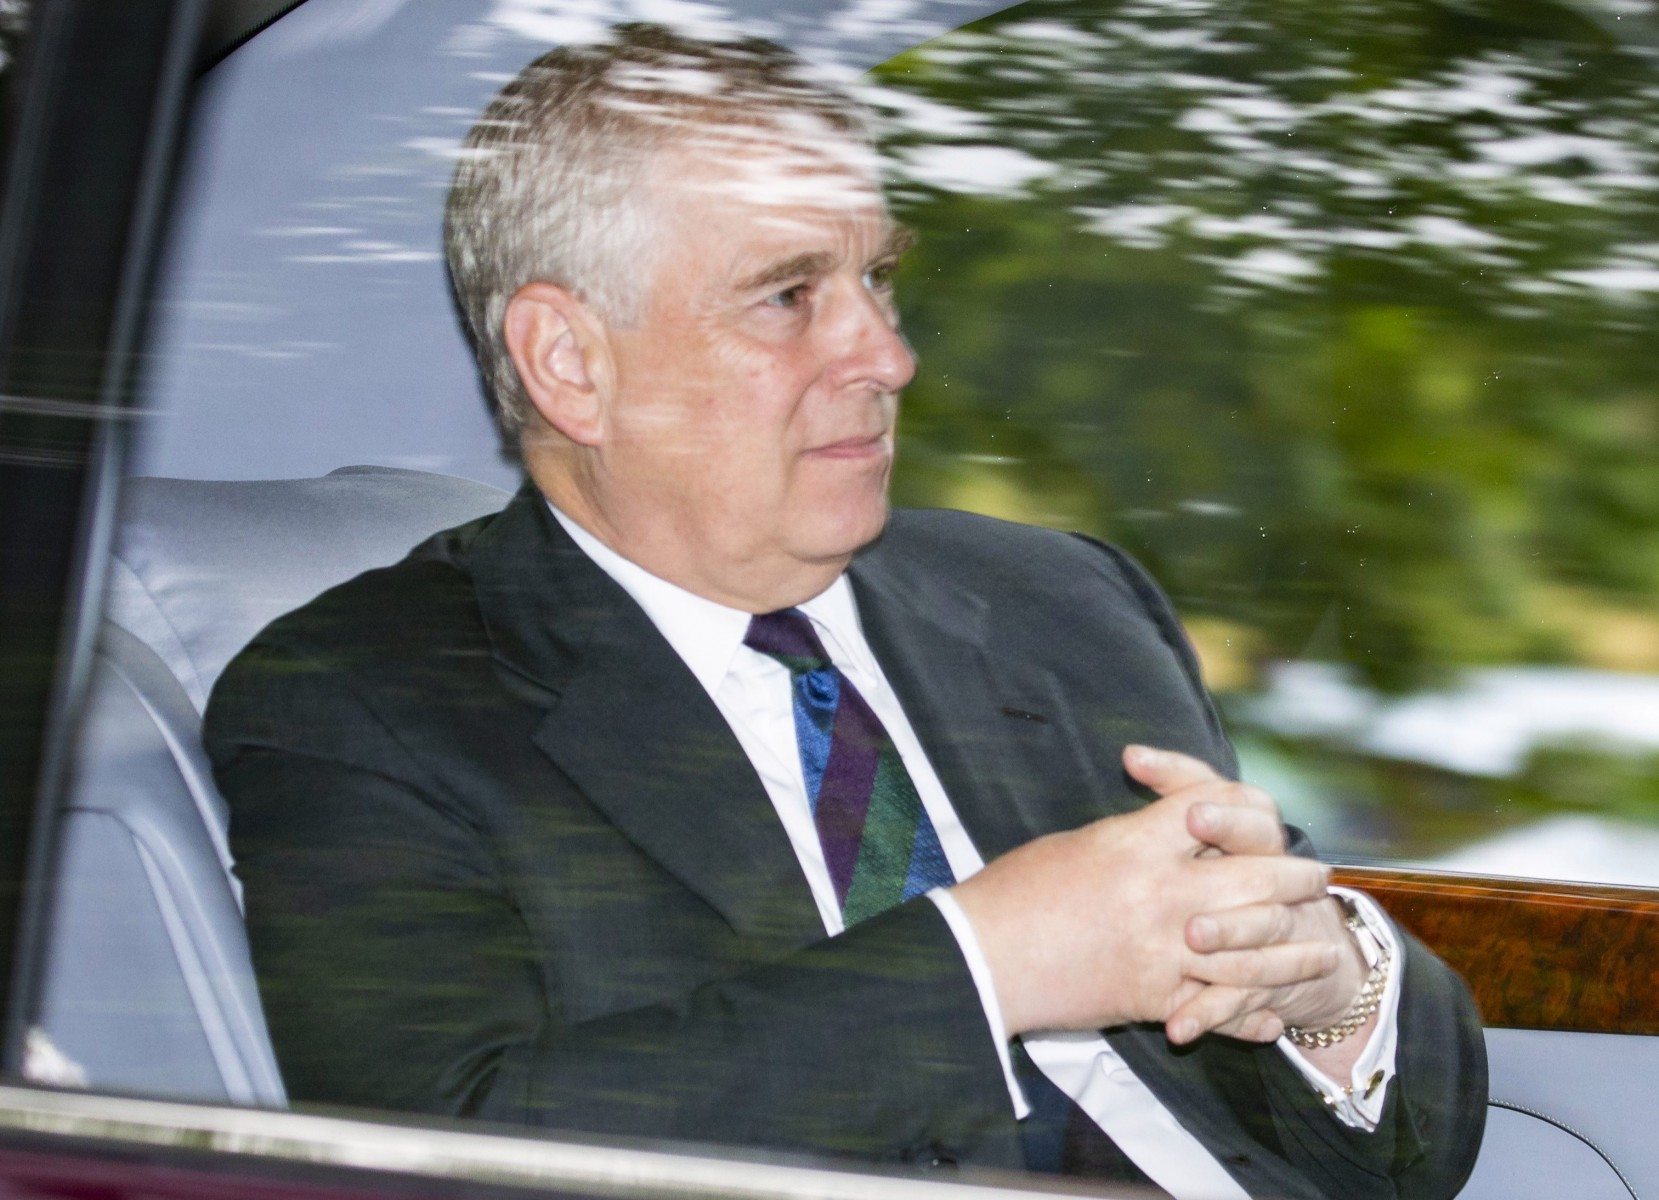 Prince Andrew is the Queen's second son